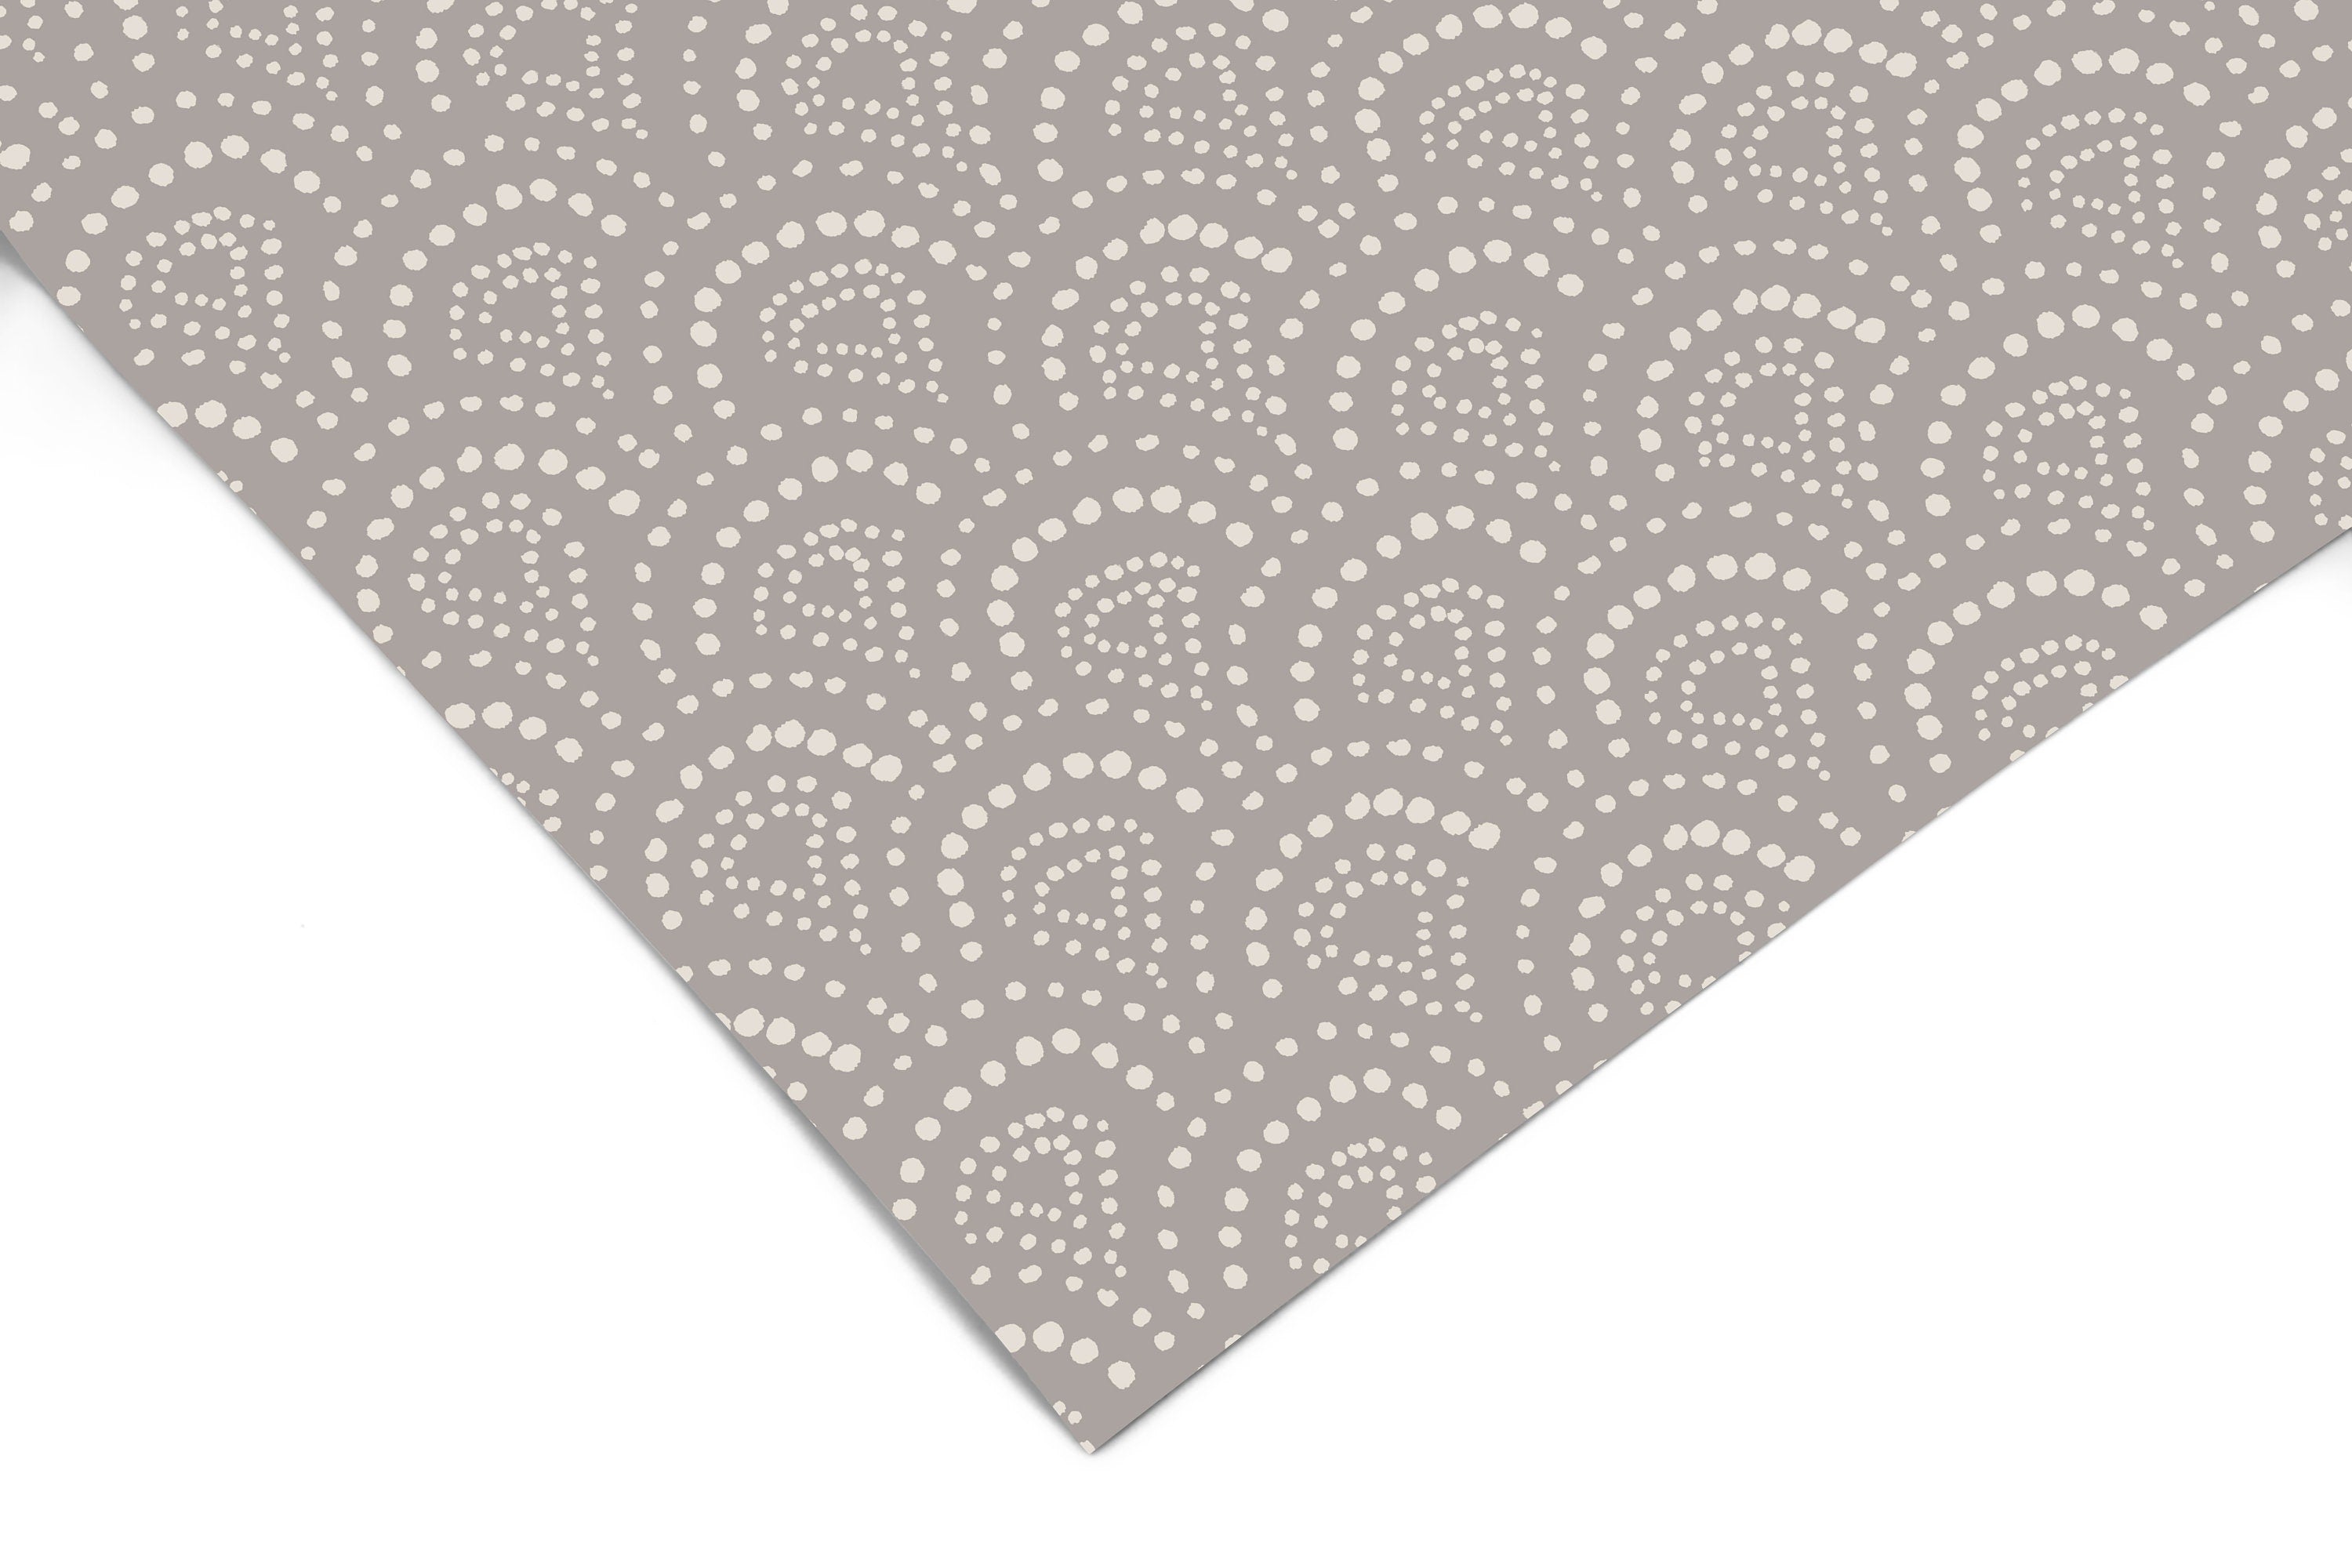 Contact Paper Neutral Gray Pattern | Peel And Stick Wallpaper | Removable Wallpaper | Shelf Liner | Drawer Liner | Peel and Stick Paper 843 - JamesAndColors